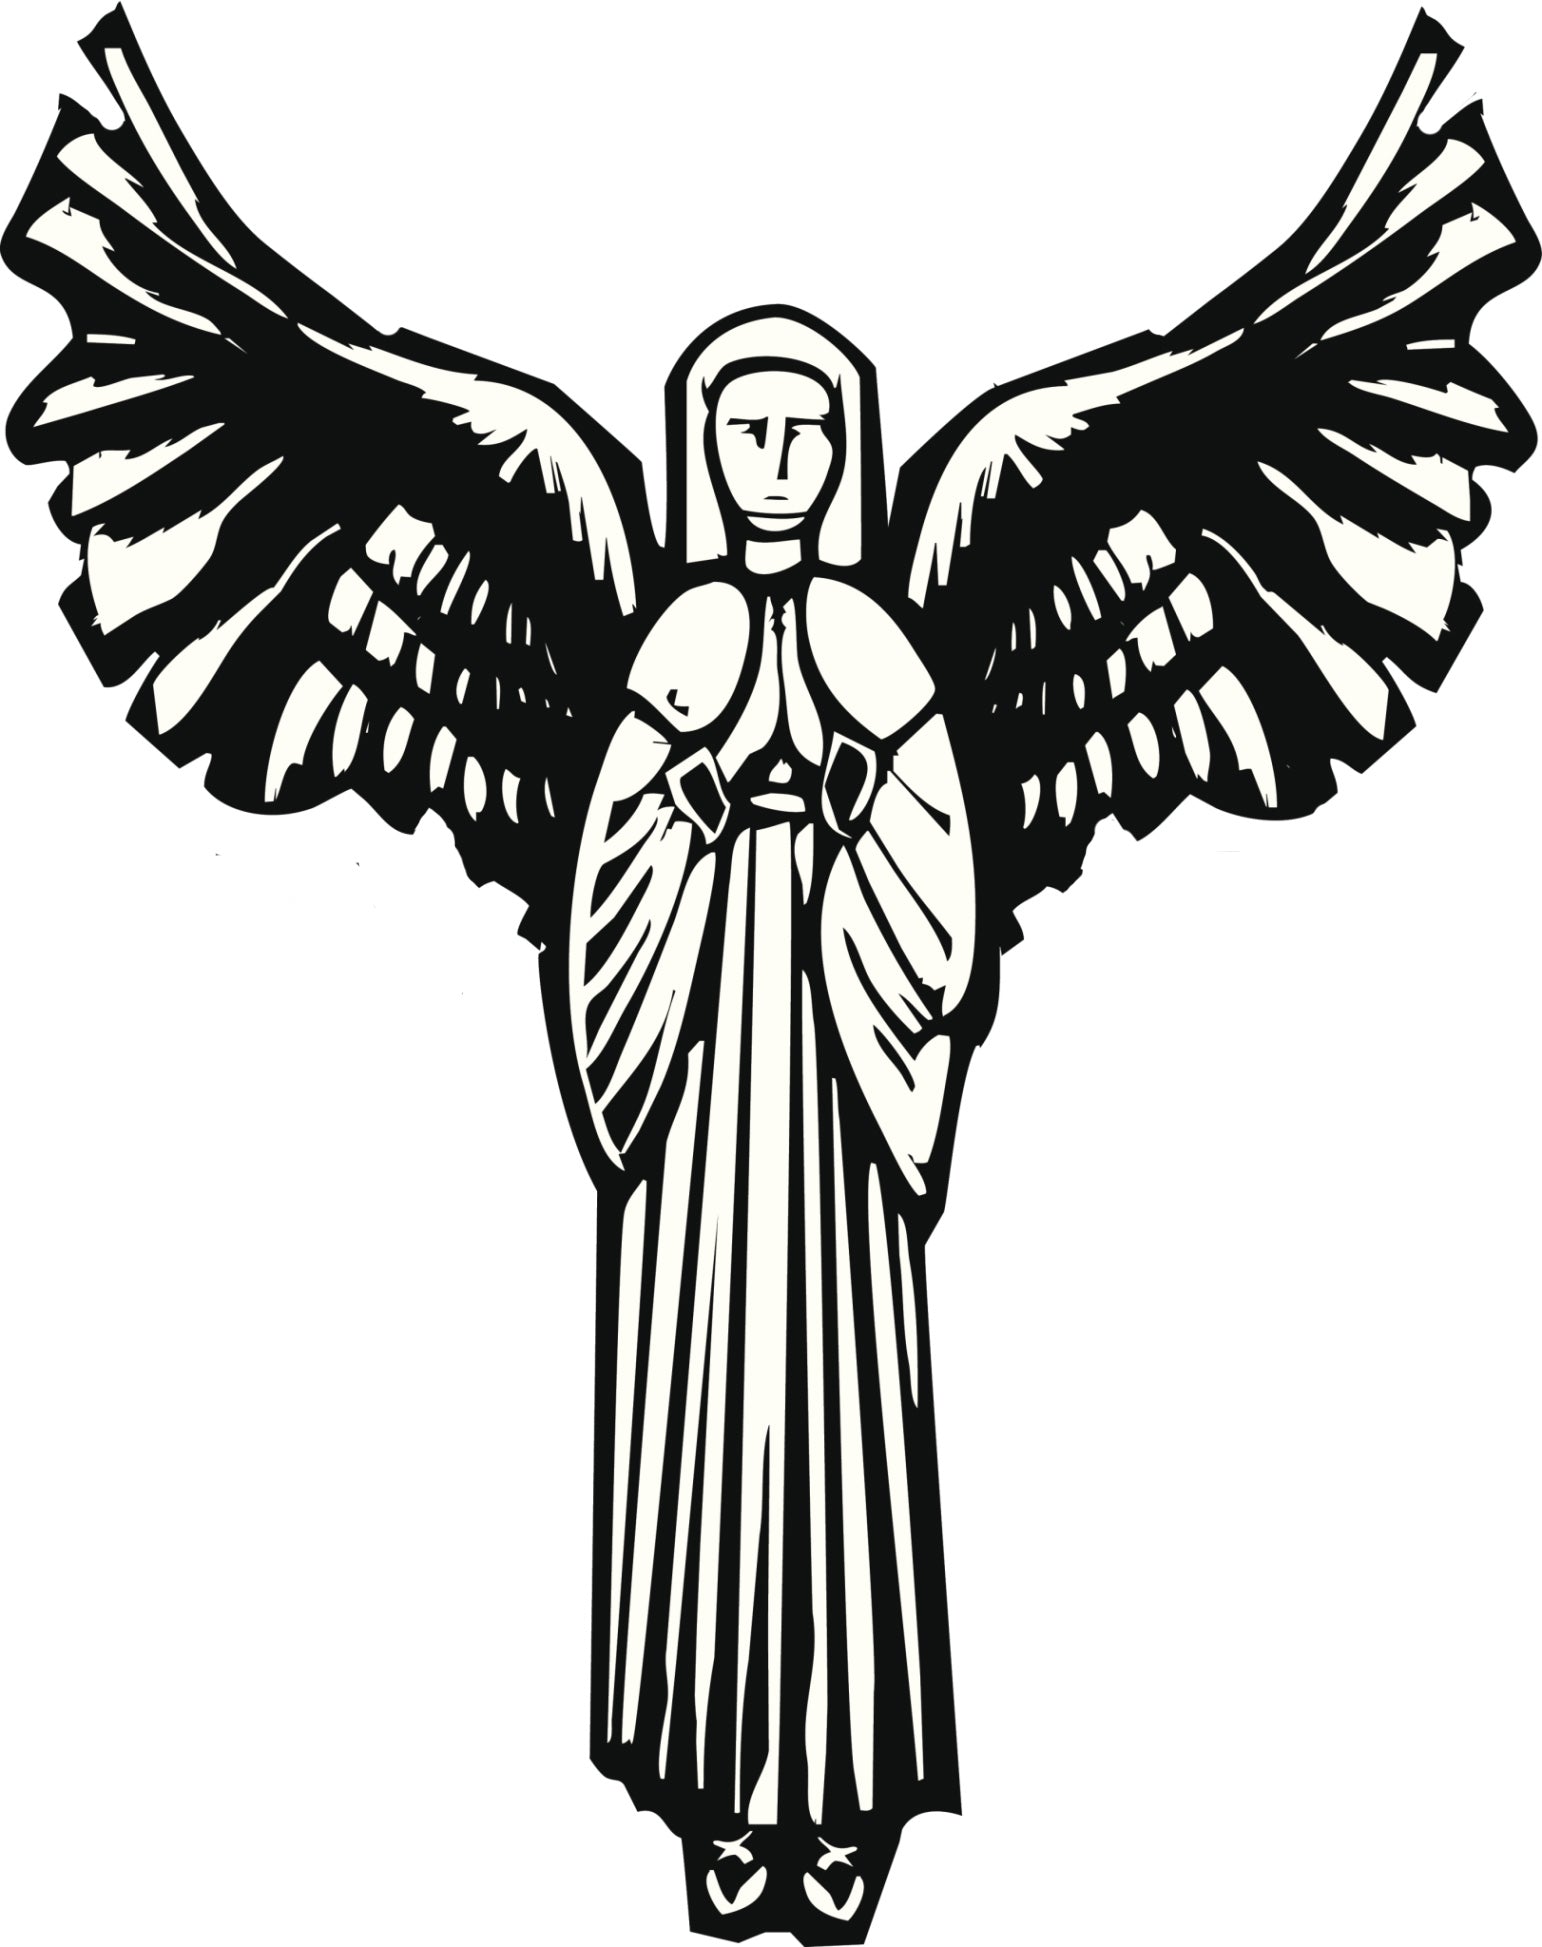 PRAYING ANGEL WITH WINGS BLACK WHITE Vinyl Decal Sticker